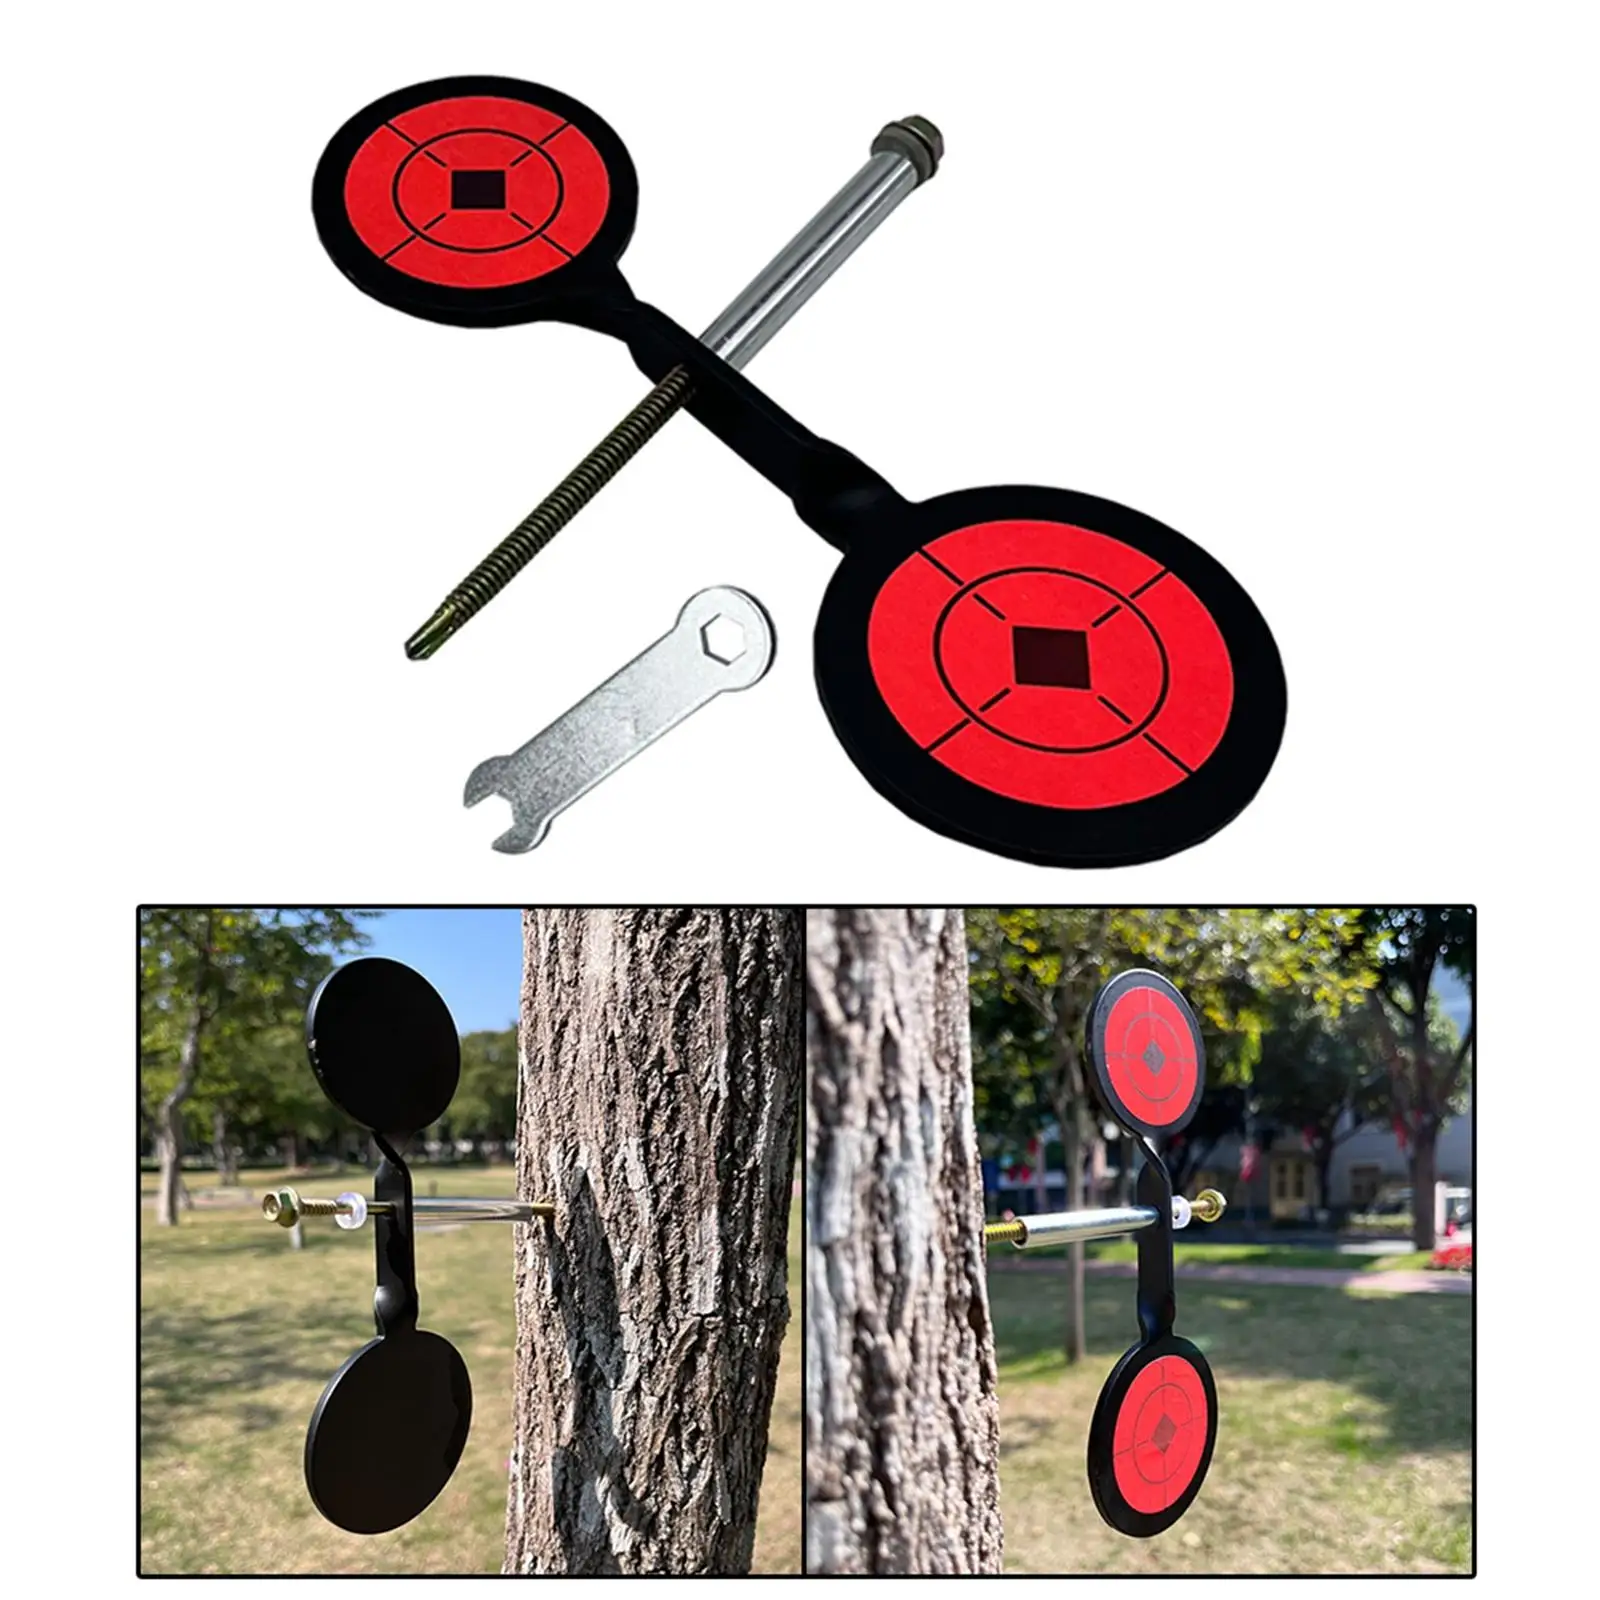 Shooting Target Reset Spinner 360 Degree Rotation Tree Mount Garden Yard Resetting Target for Practice Hunting Outdoor Training